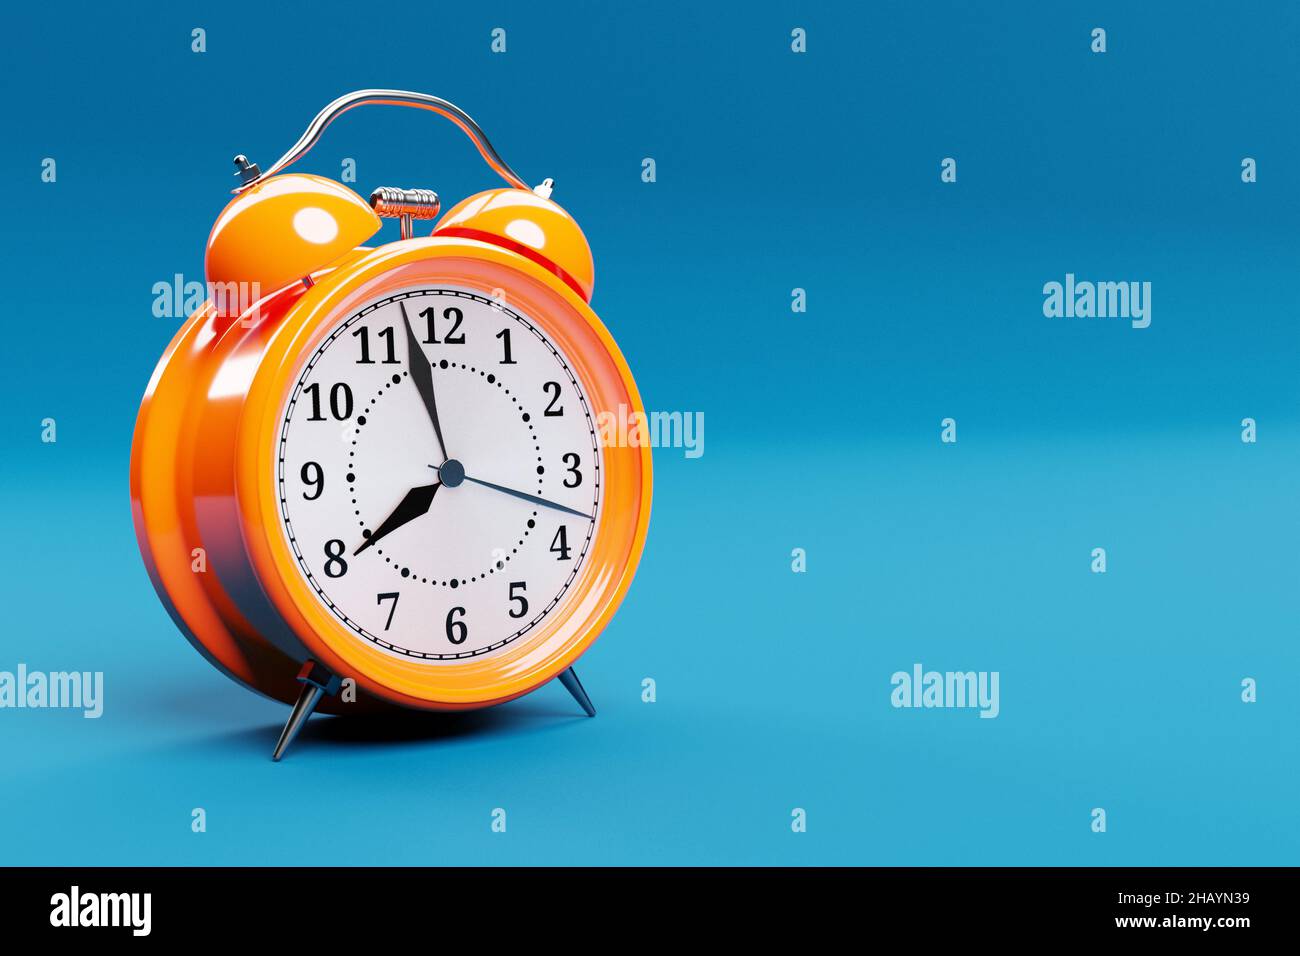 An orange vintage alarm clock standing on the floor with a bright blue background. 3d render illustration Stock Photo